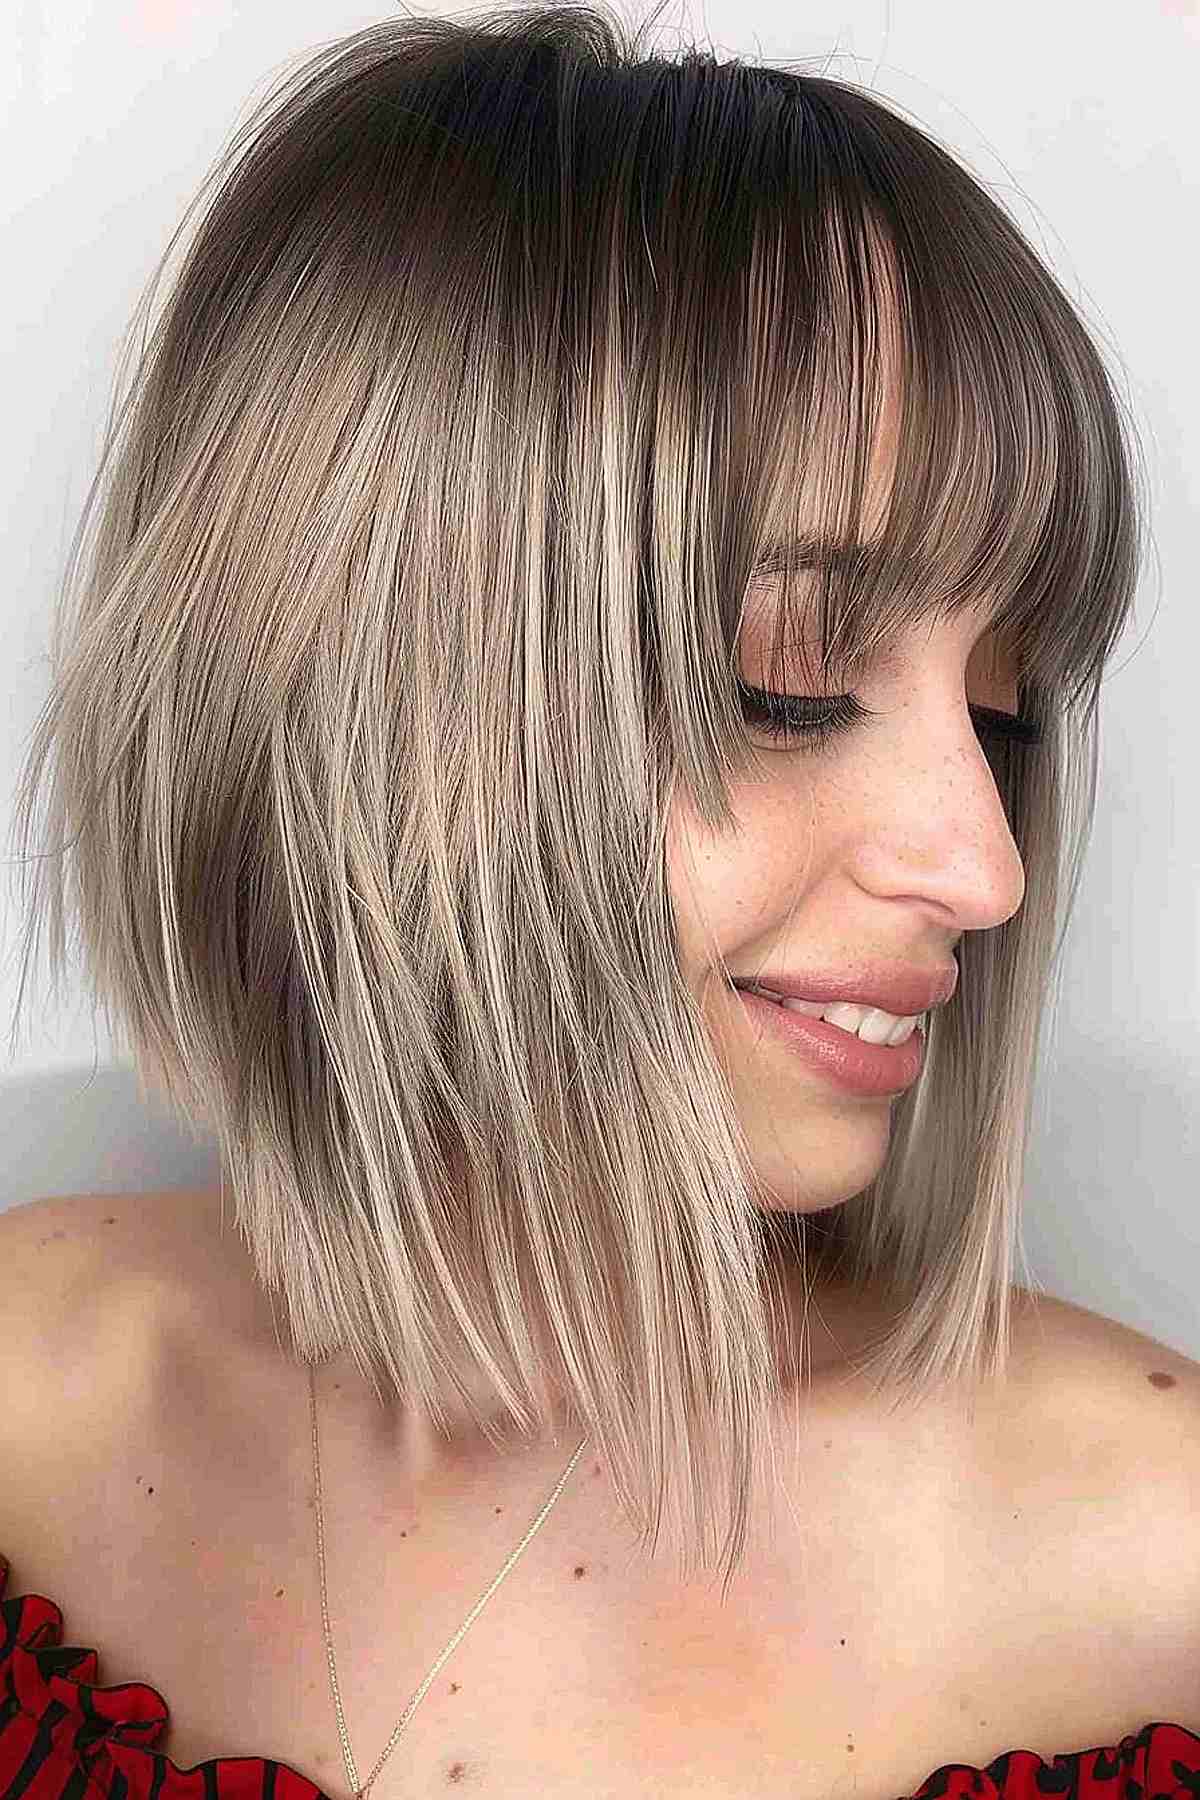 Woman with a tapered blonde bob and long bangs showing dark to light color gradient